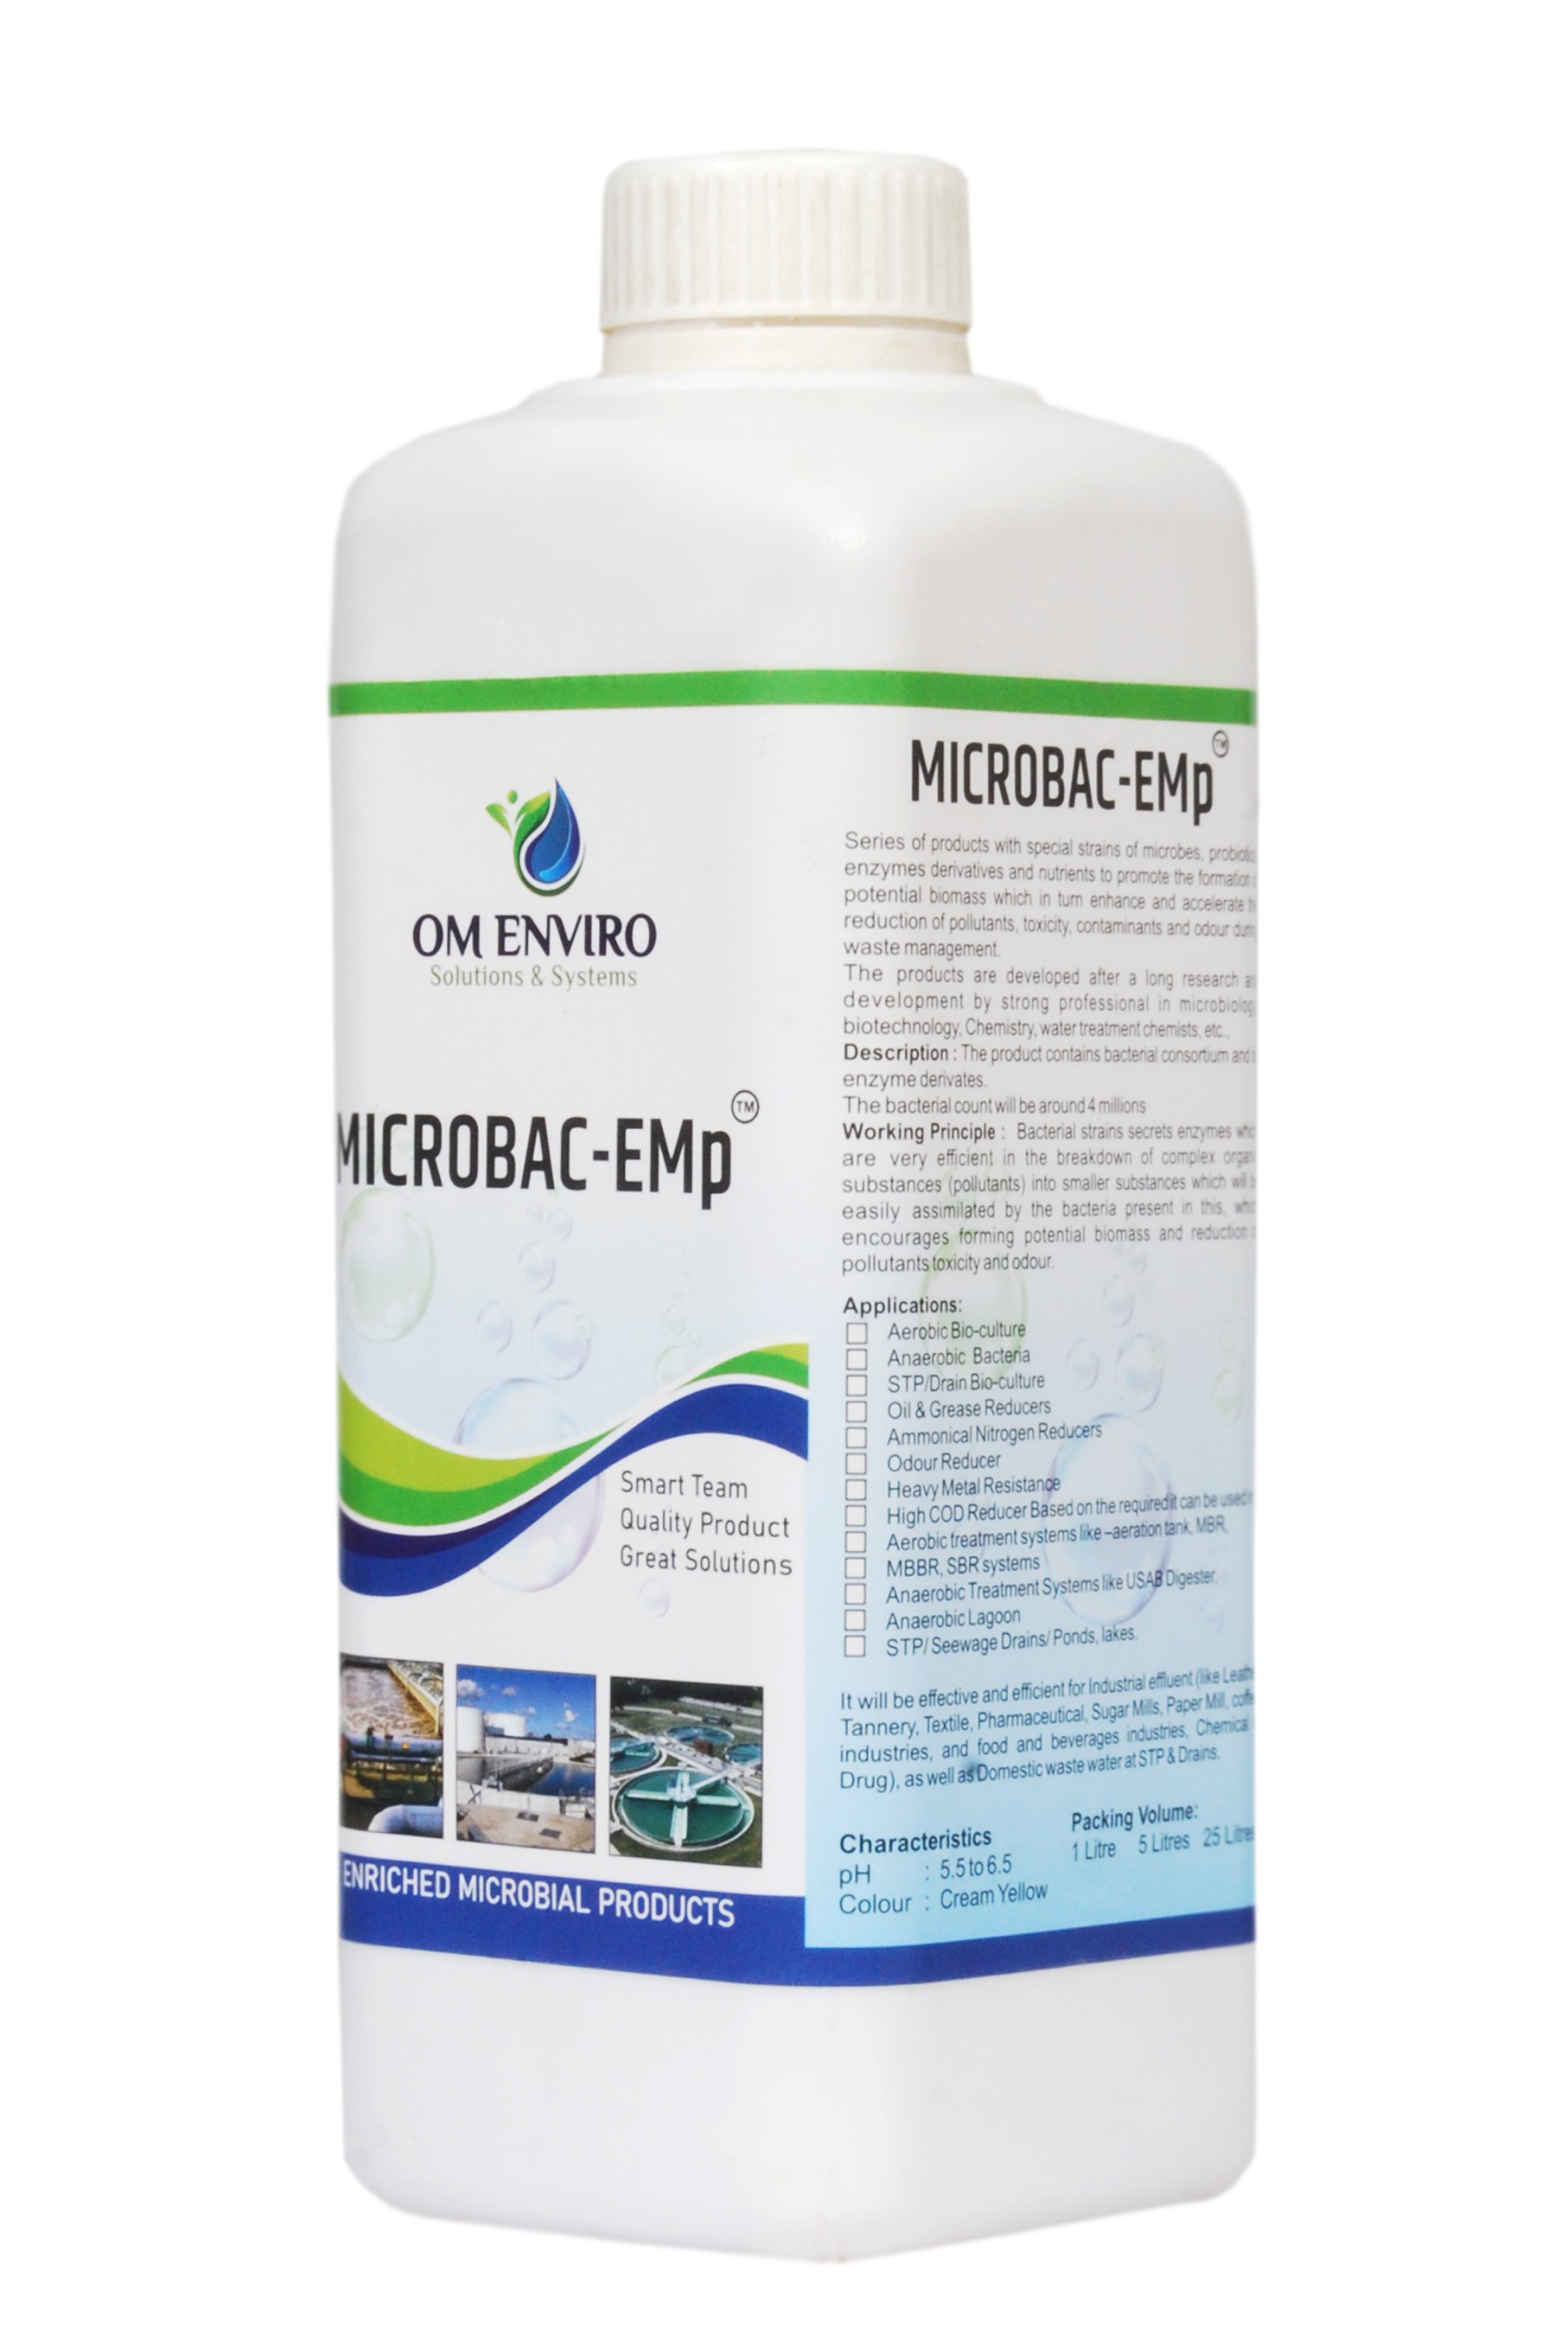 microbac-emp-enriched-microbial-products